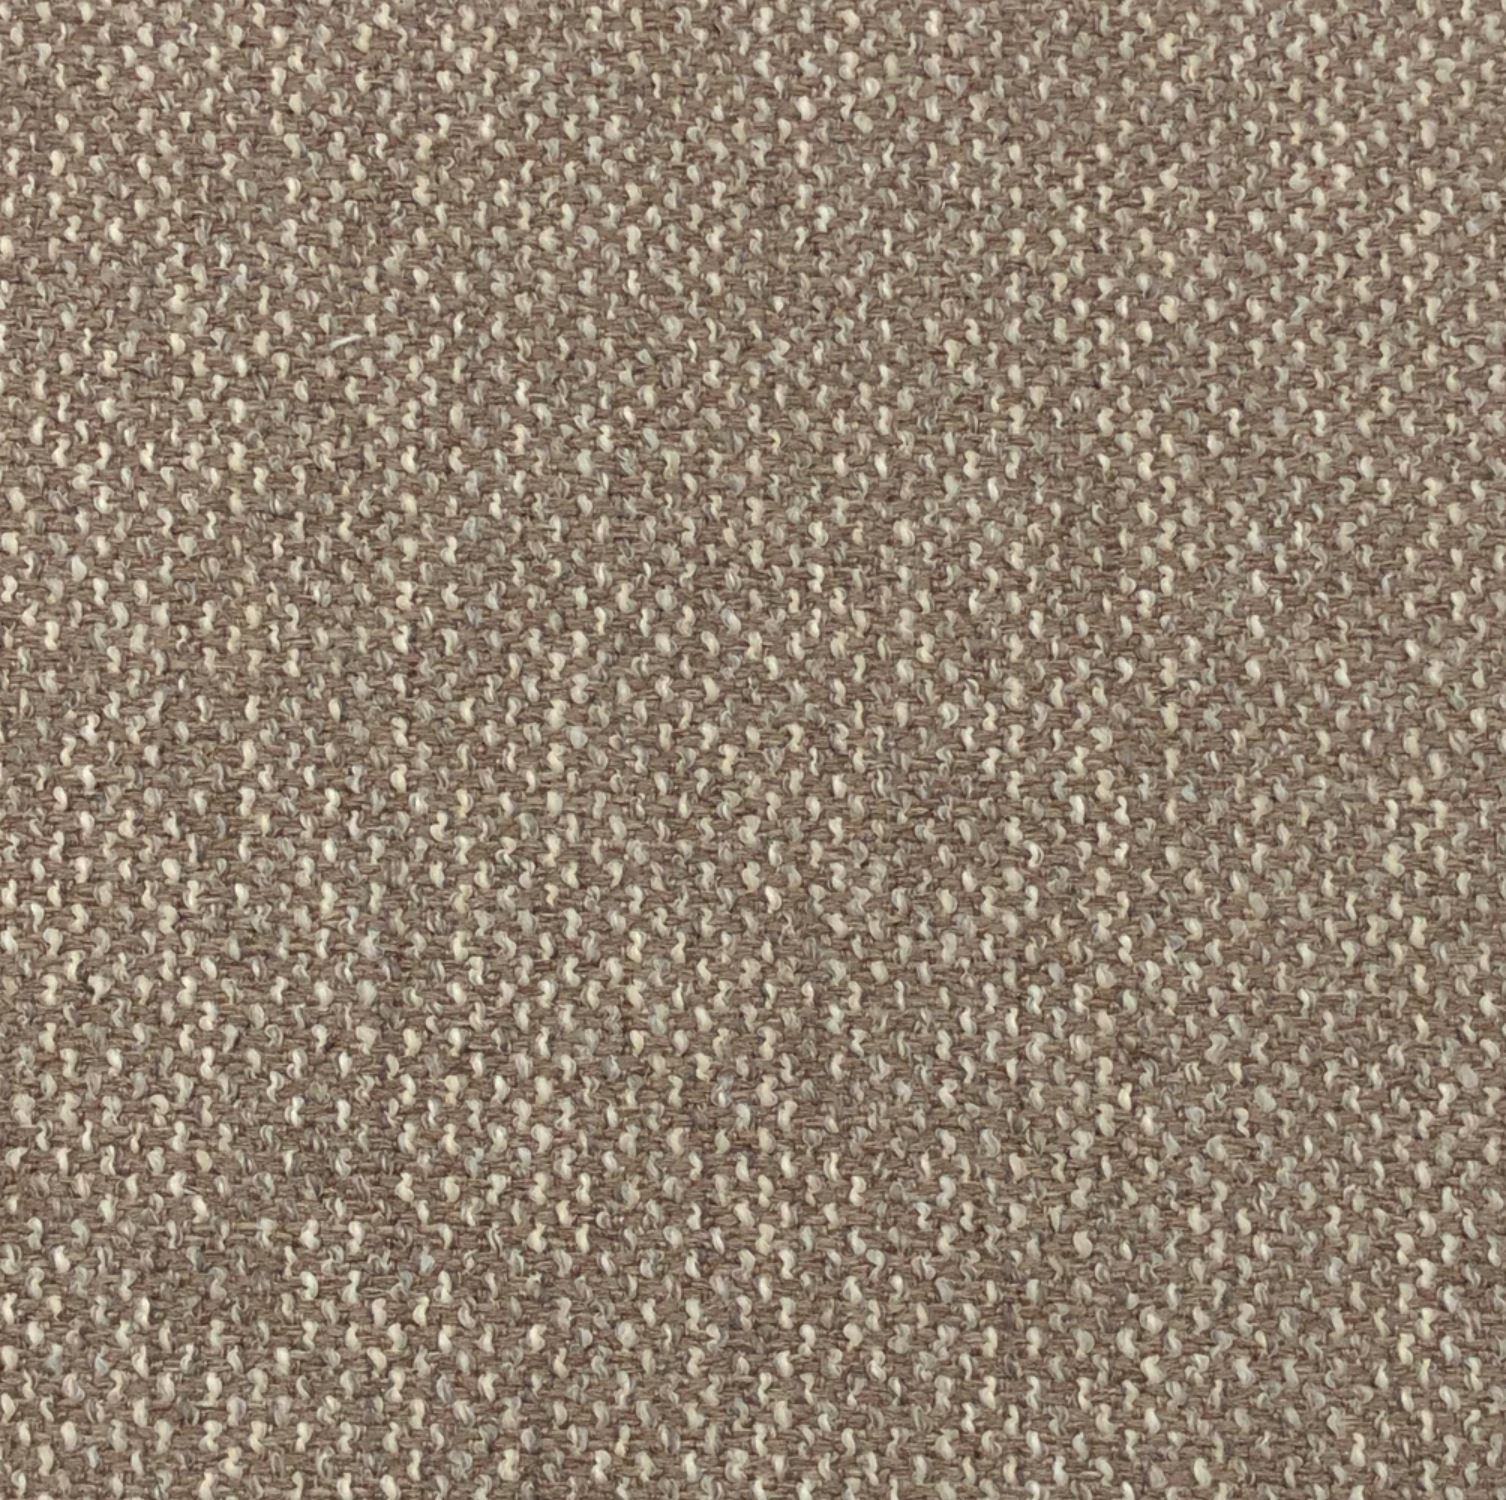 Revolution Fabric A Bluepoint Cement Swatch